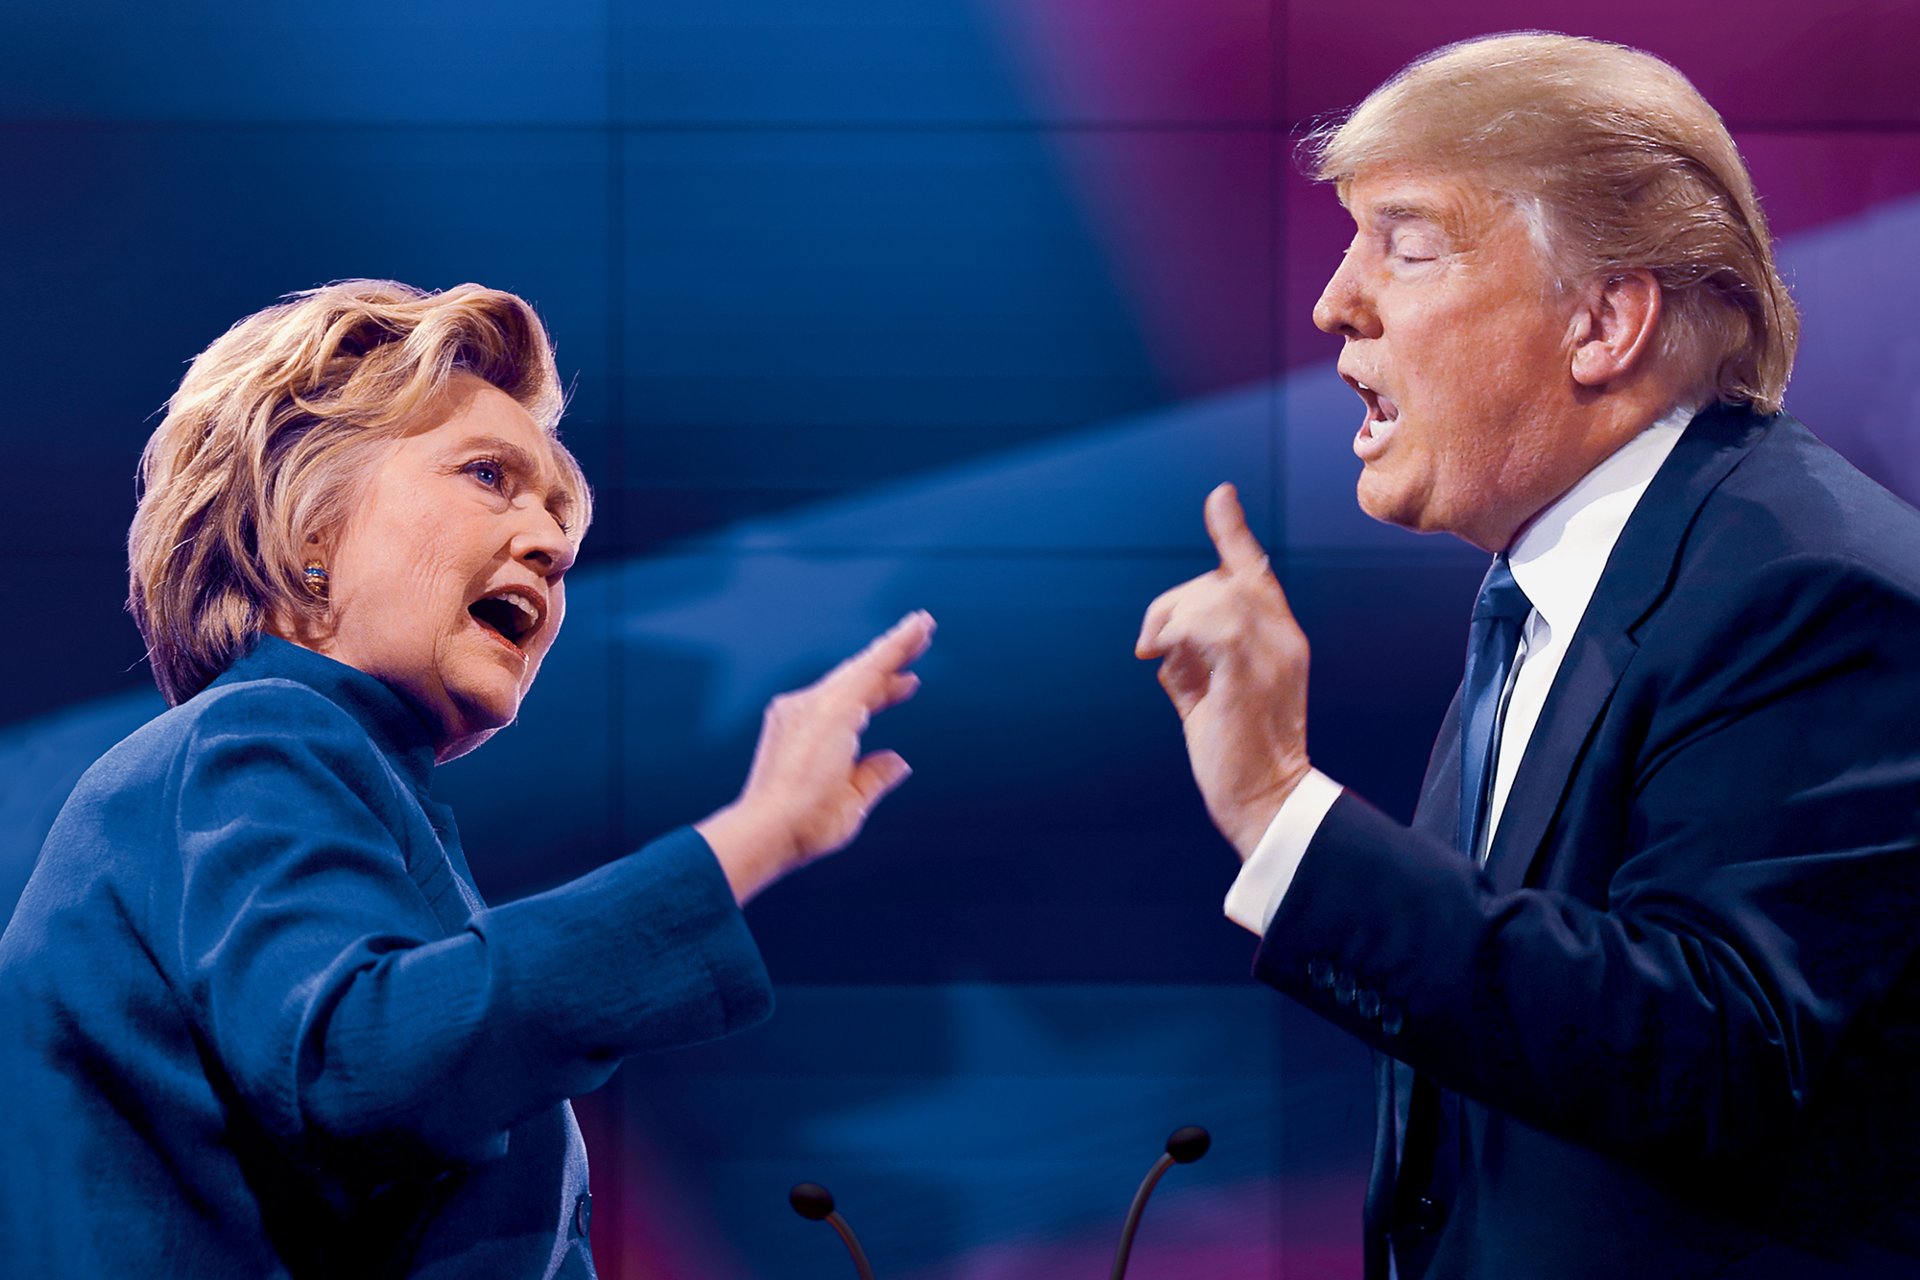 Pre-Debate Polls: Who do you EXPECT is going to win? Who do you want to win?